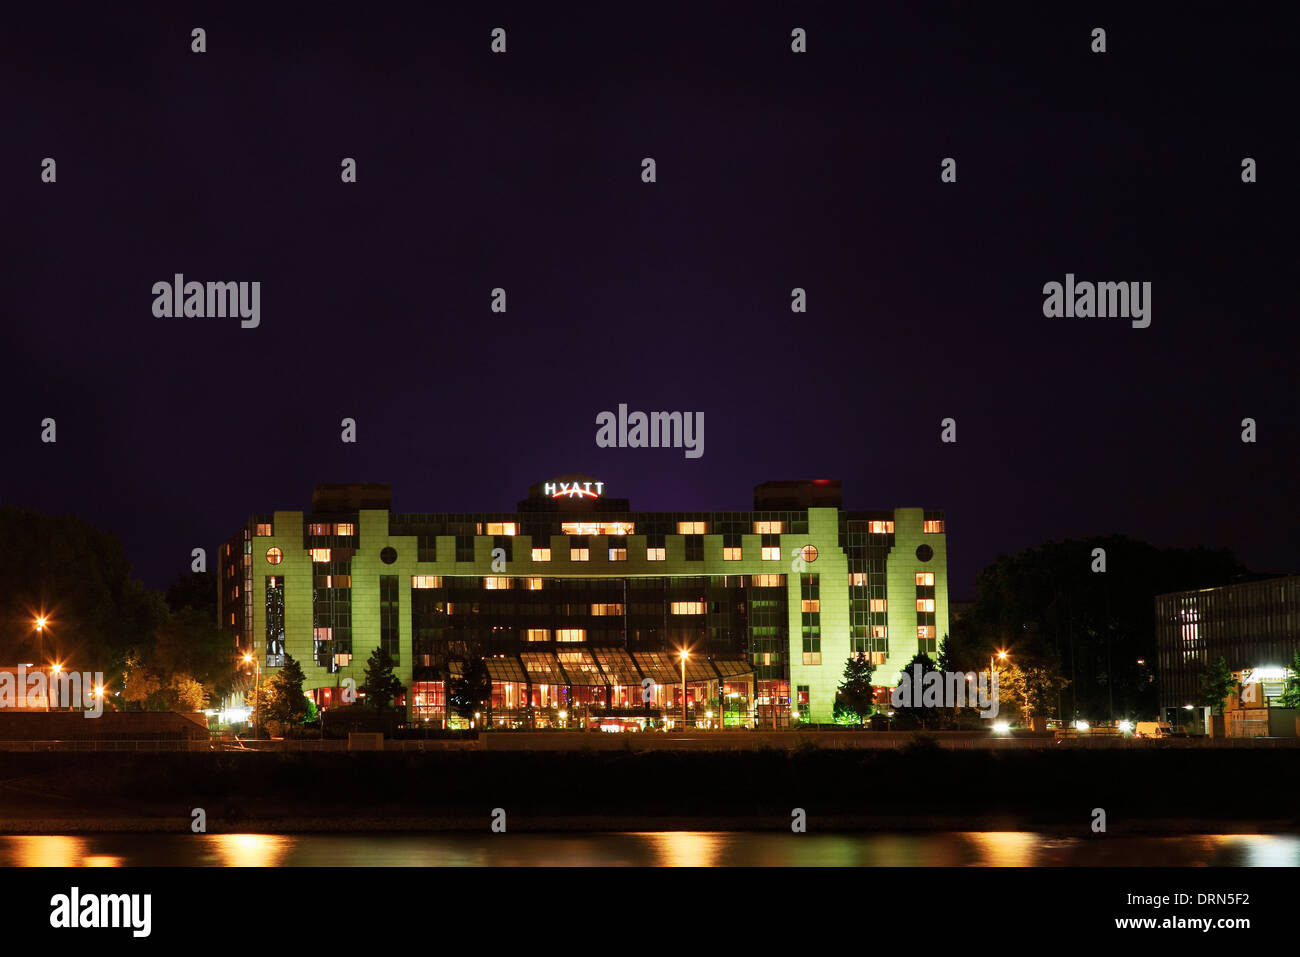 The illuminated Hyatt hotel building in Cologne at night, Germany. Stock Photo